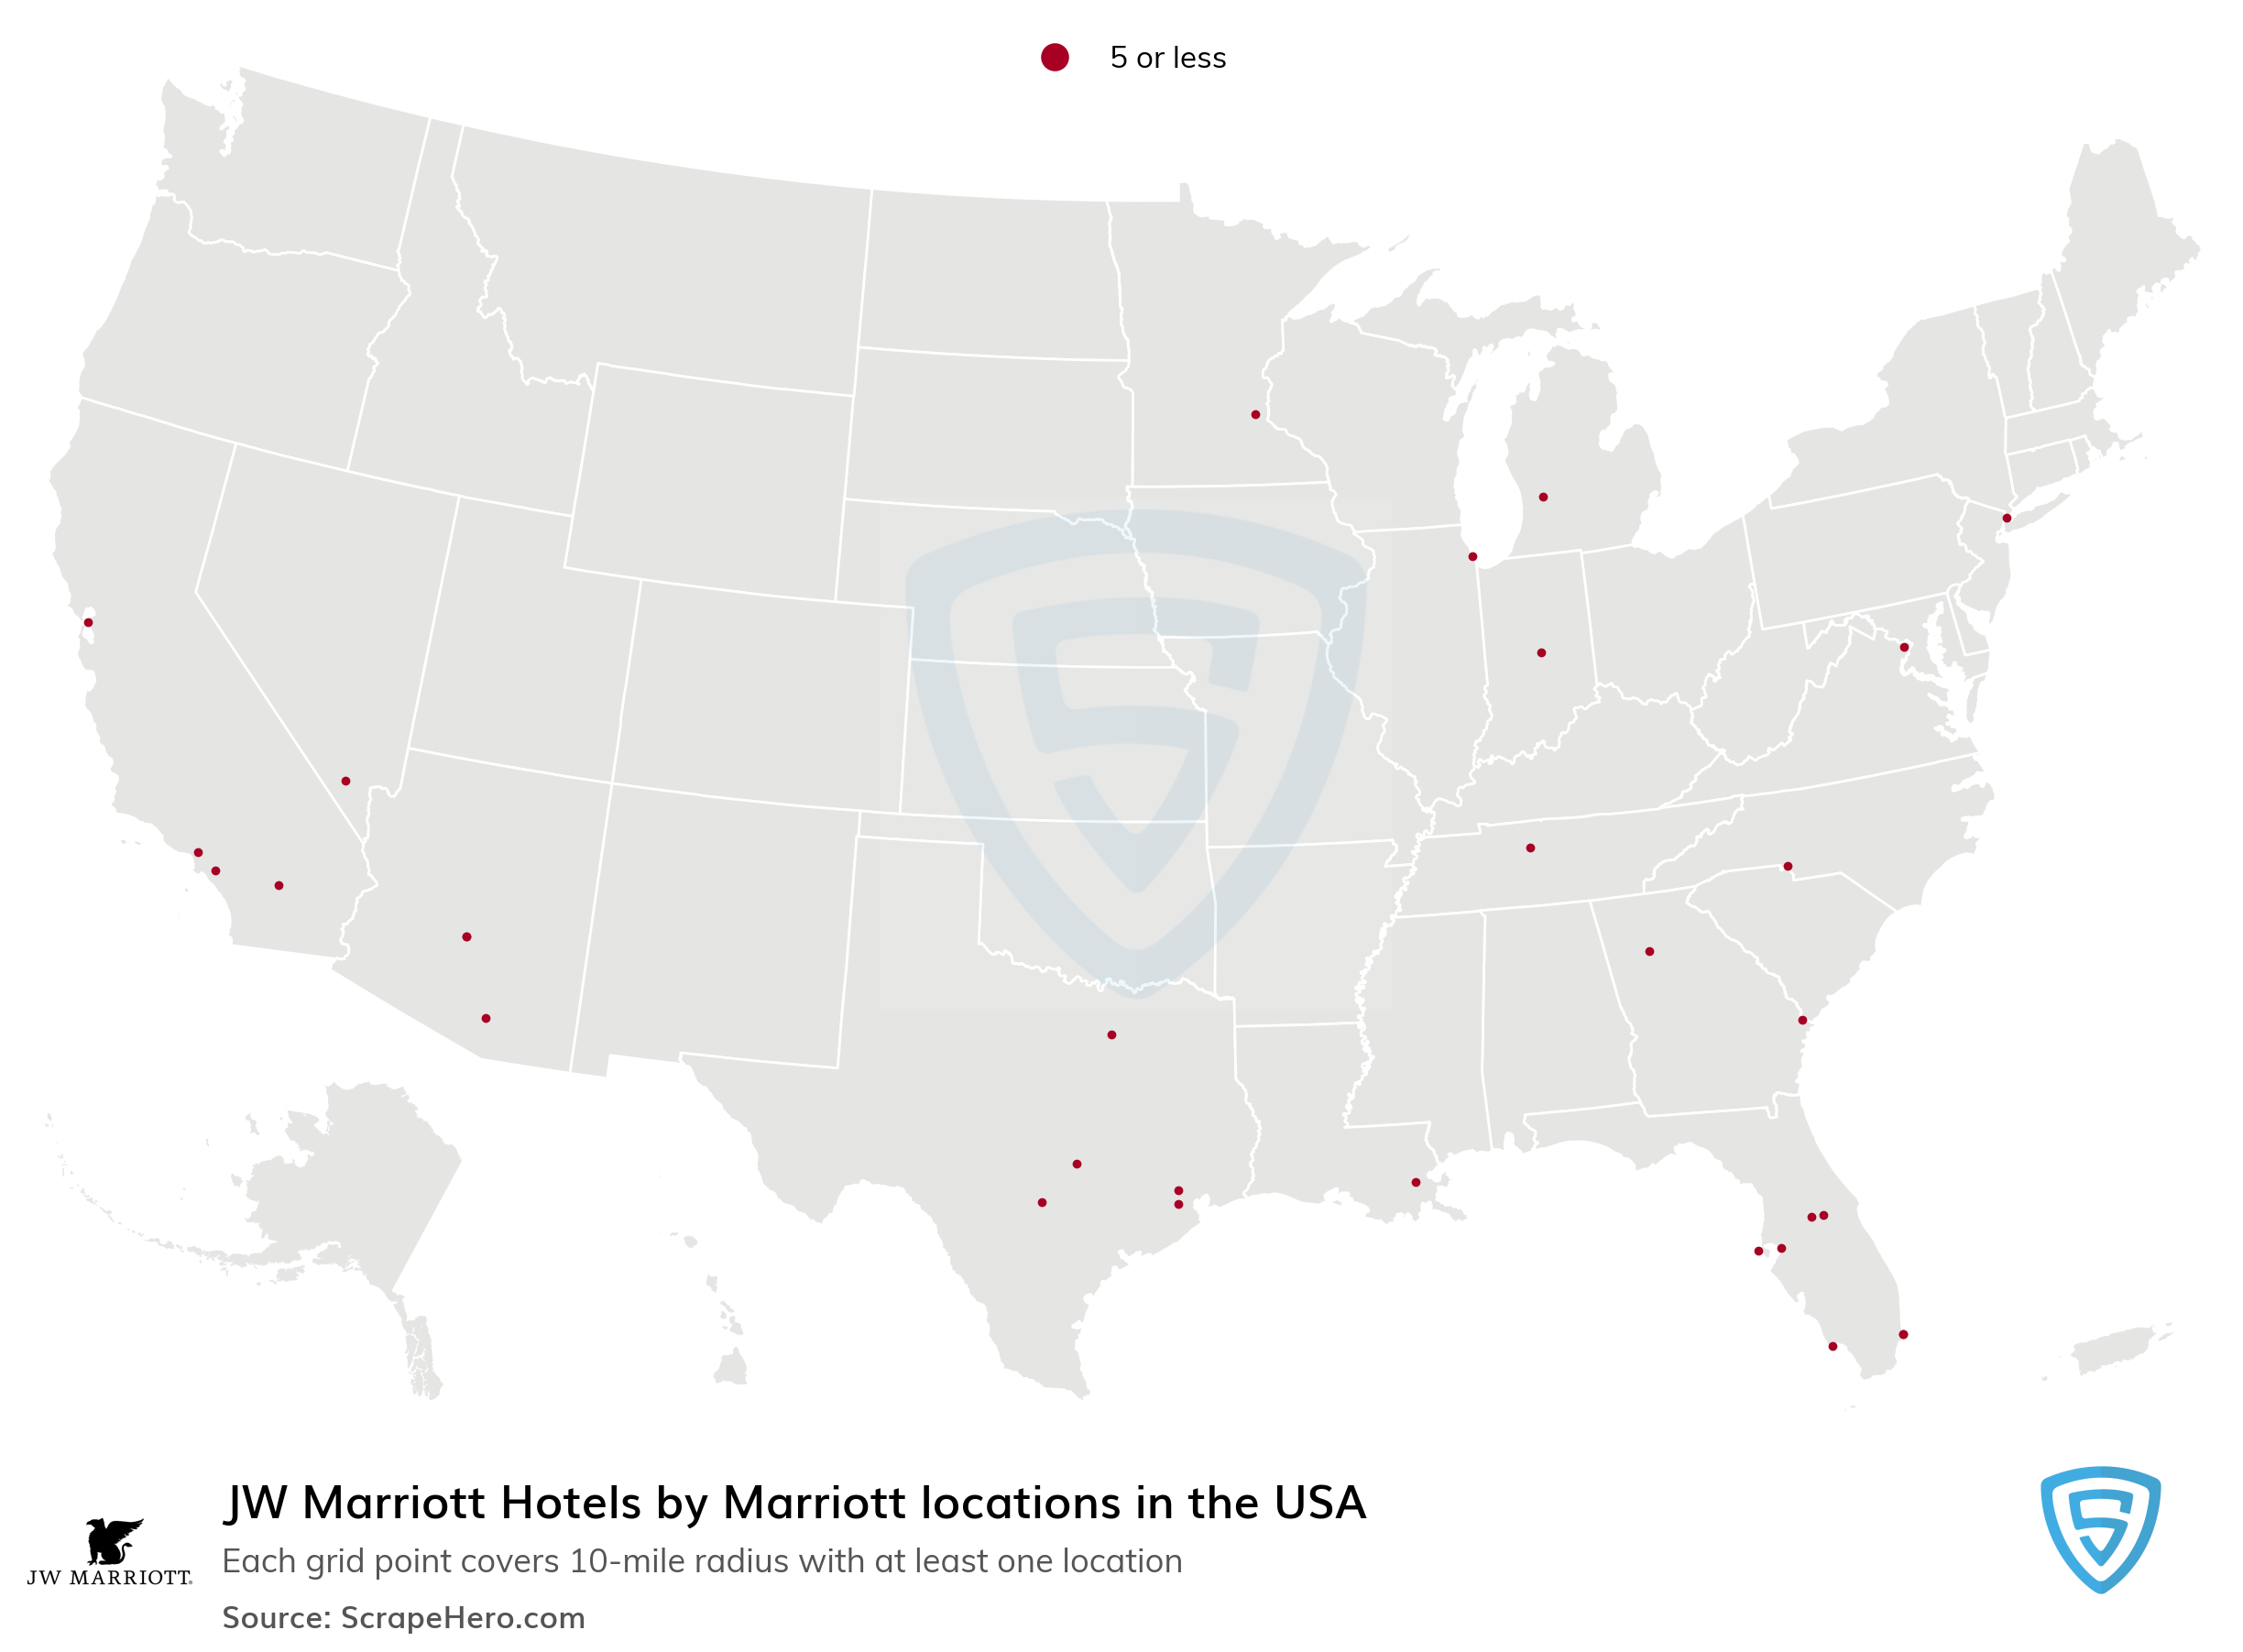 Number of JW Marriott Hotels by Marriott locations in the USA in